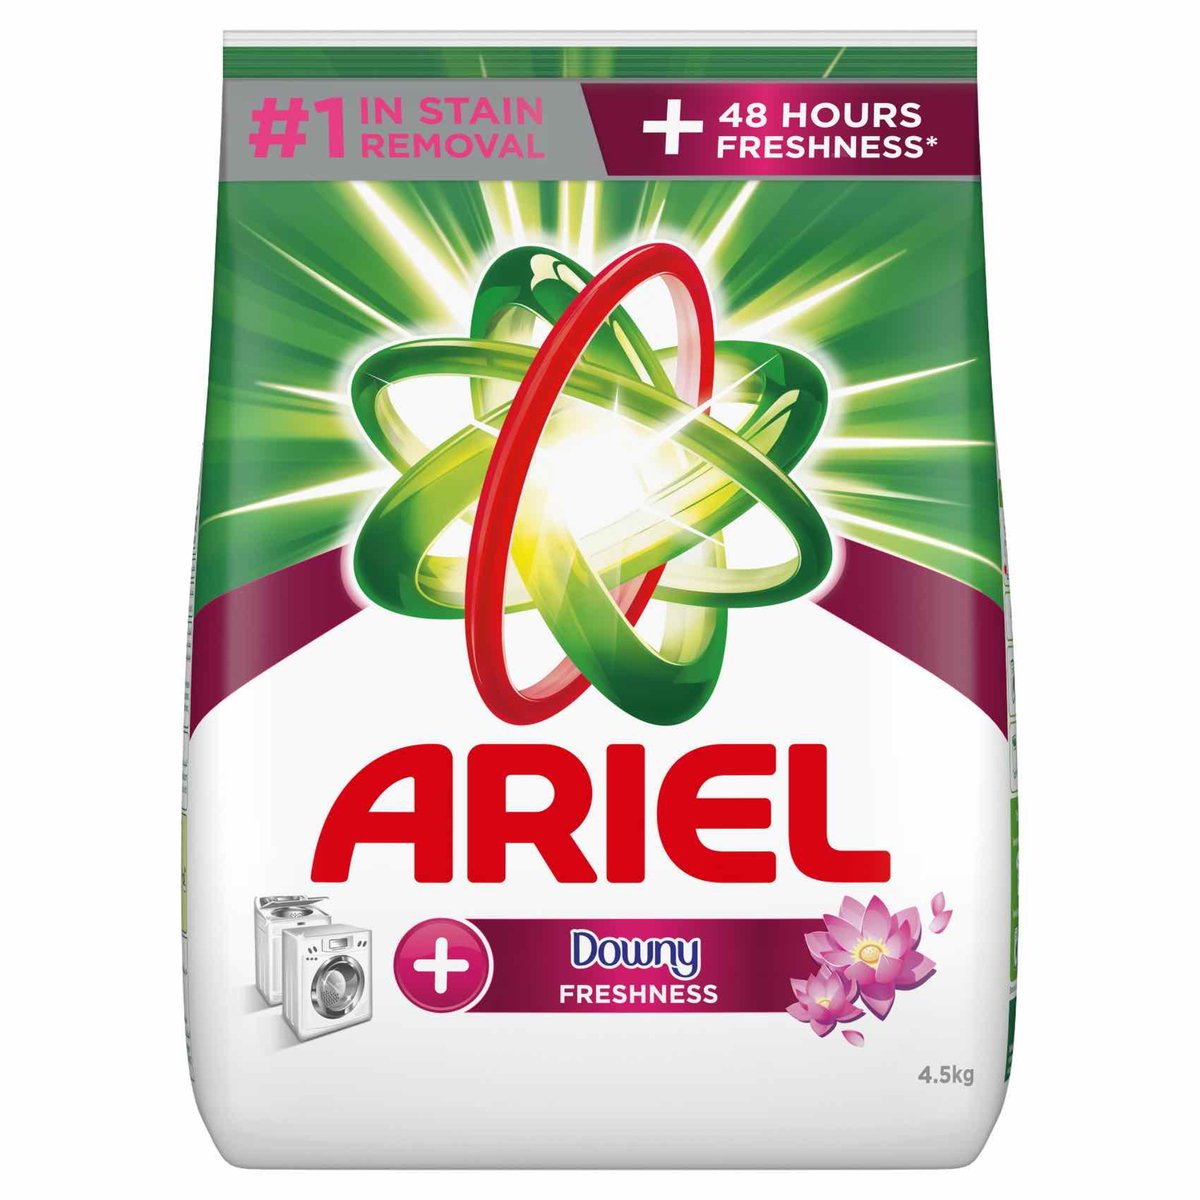 Buy Ariel Automatic Downy Fresh Laundry Detergent Powder, Number 1 in Stain Removal with 48 Hours of Freshness, 4.5 kg Online at Best Price | Front load washing powders | Lulu UAE in Kuwait